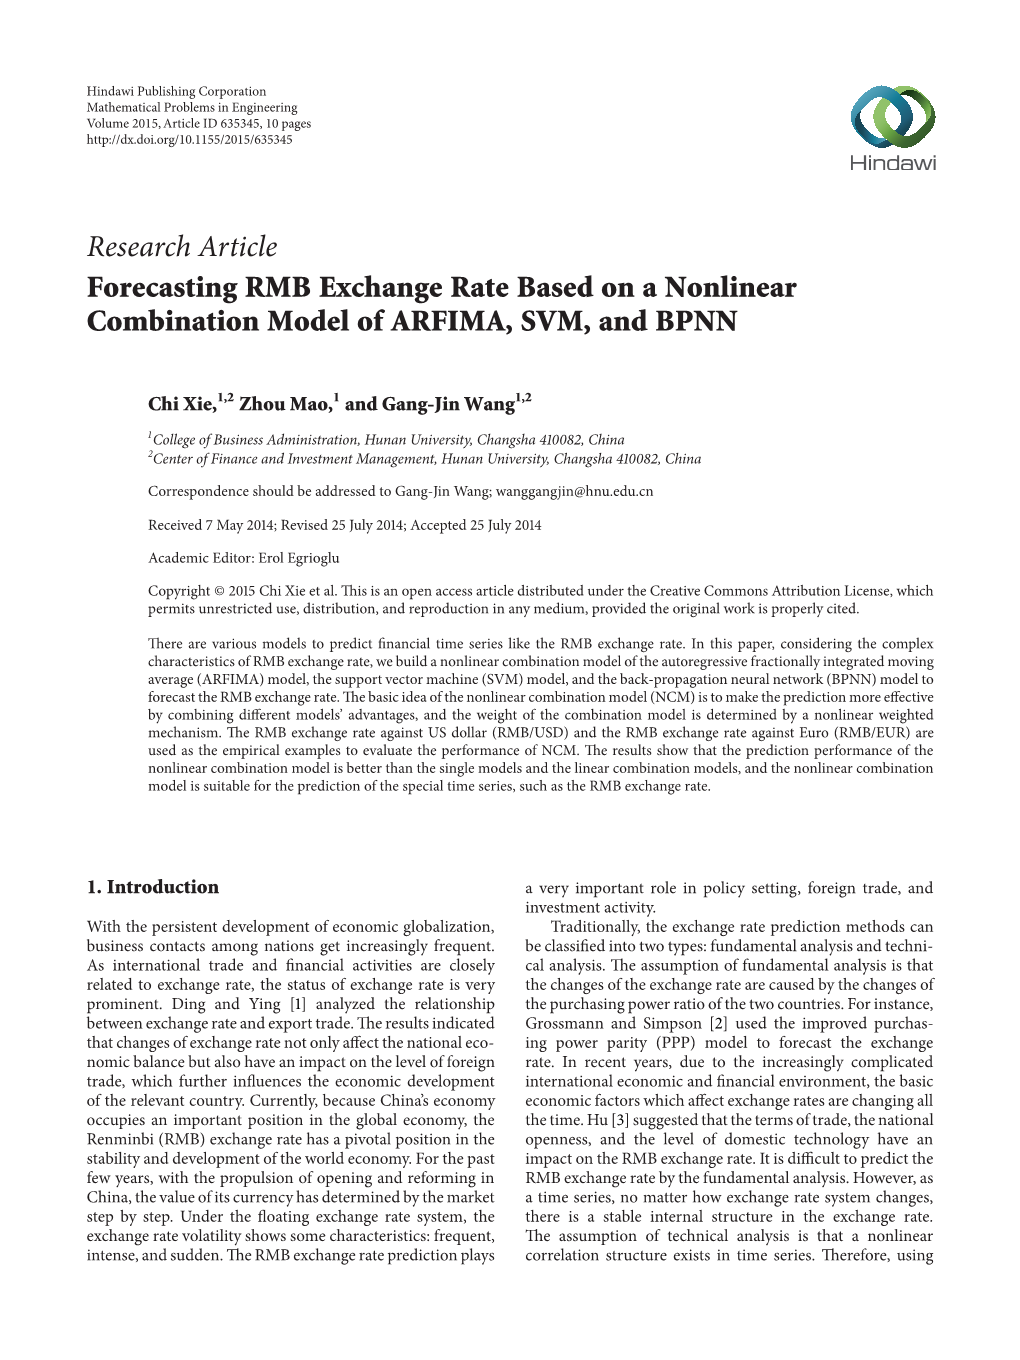 Research Article Forecasting RMB Exchange Rate Based on a Nonlinear Combination Model of ARFIMA, SVM, and BPNN